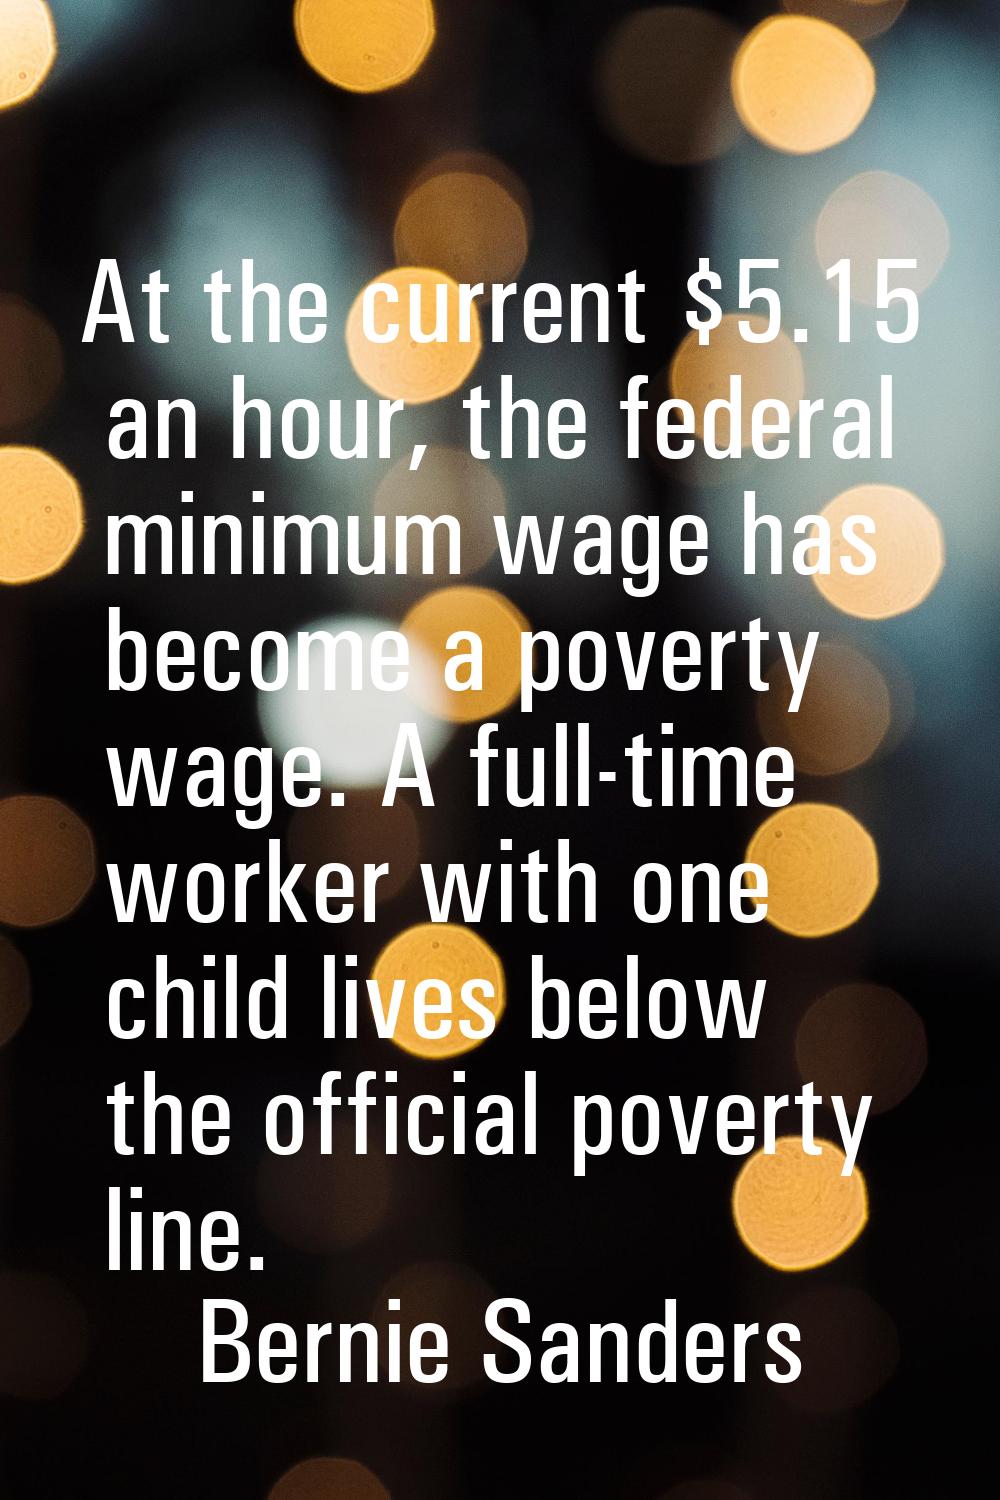 At the current $5.15 an hour, the federal minimum wage has become a poverty wage. A full-time worke